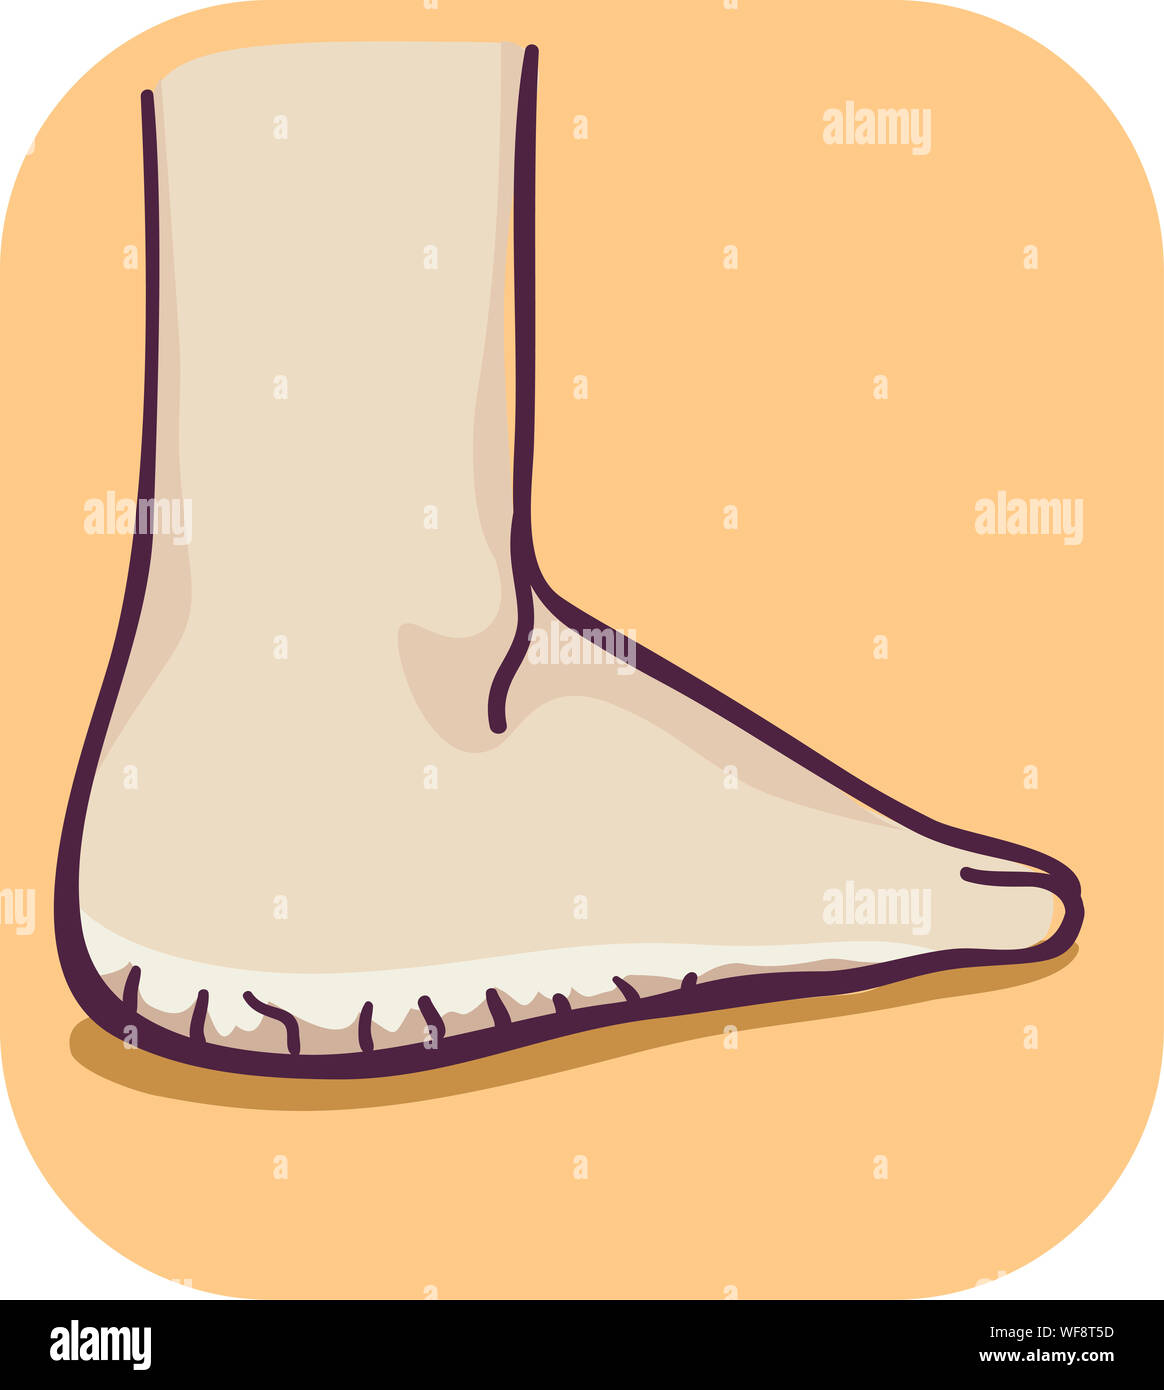 Illustration of a Dry and Thick Skin of the Feet Stock Photo